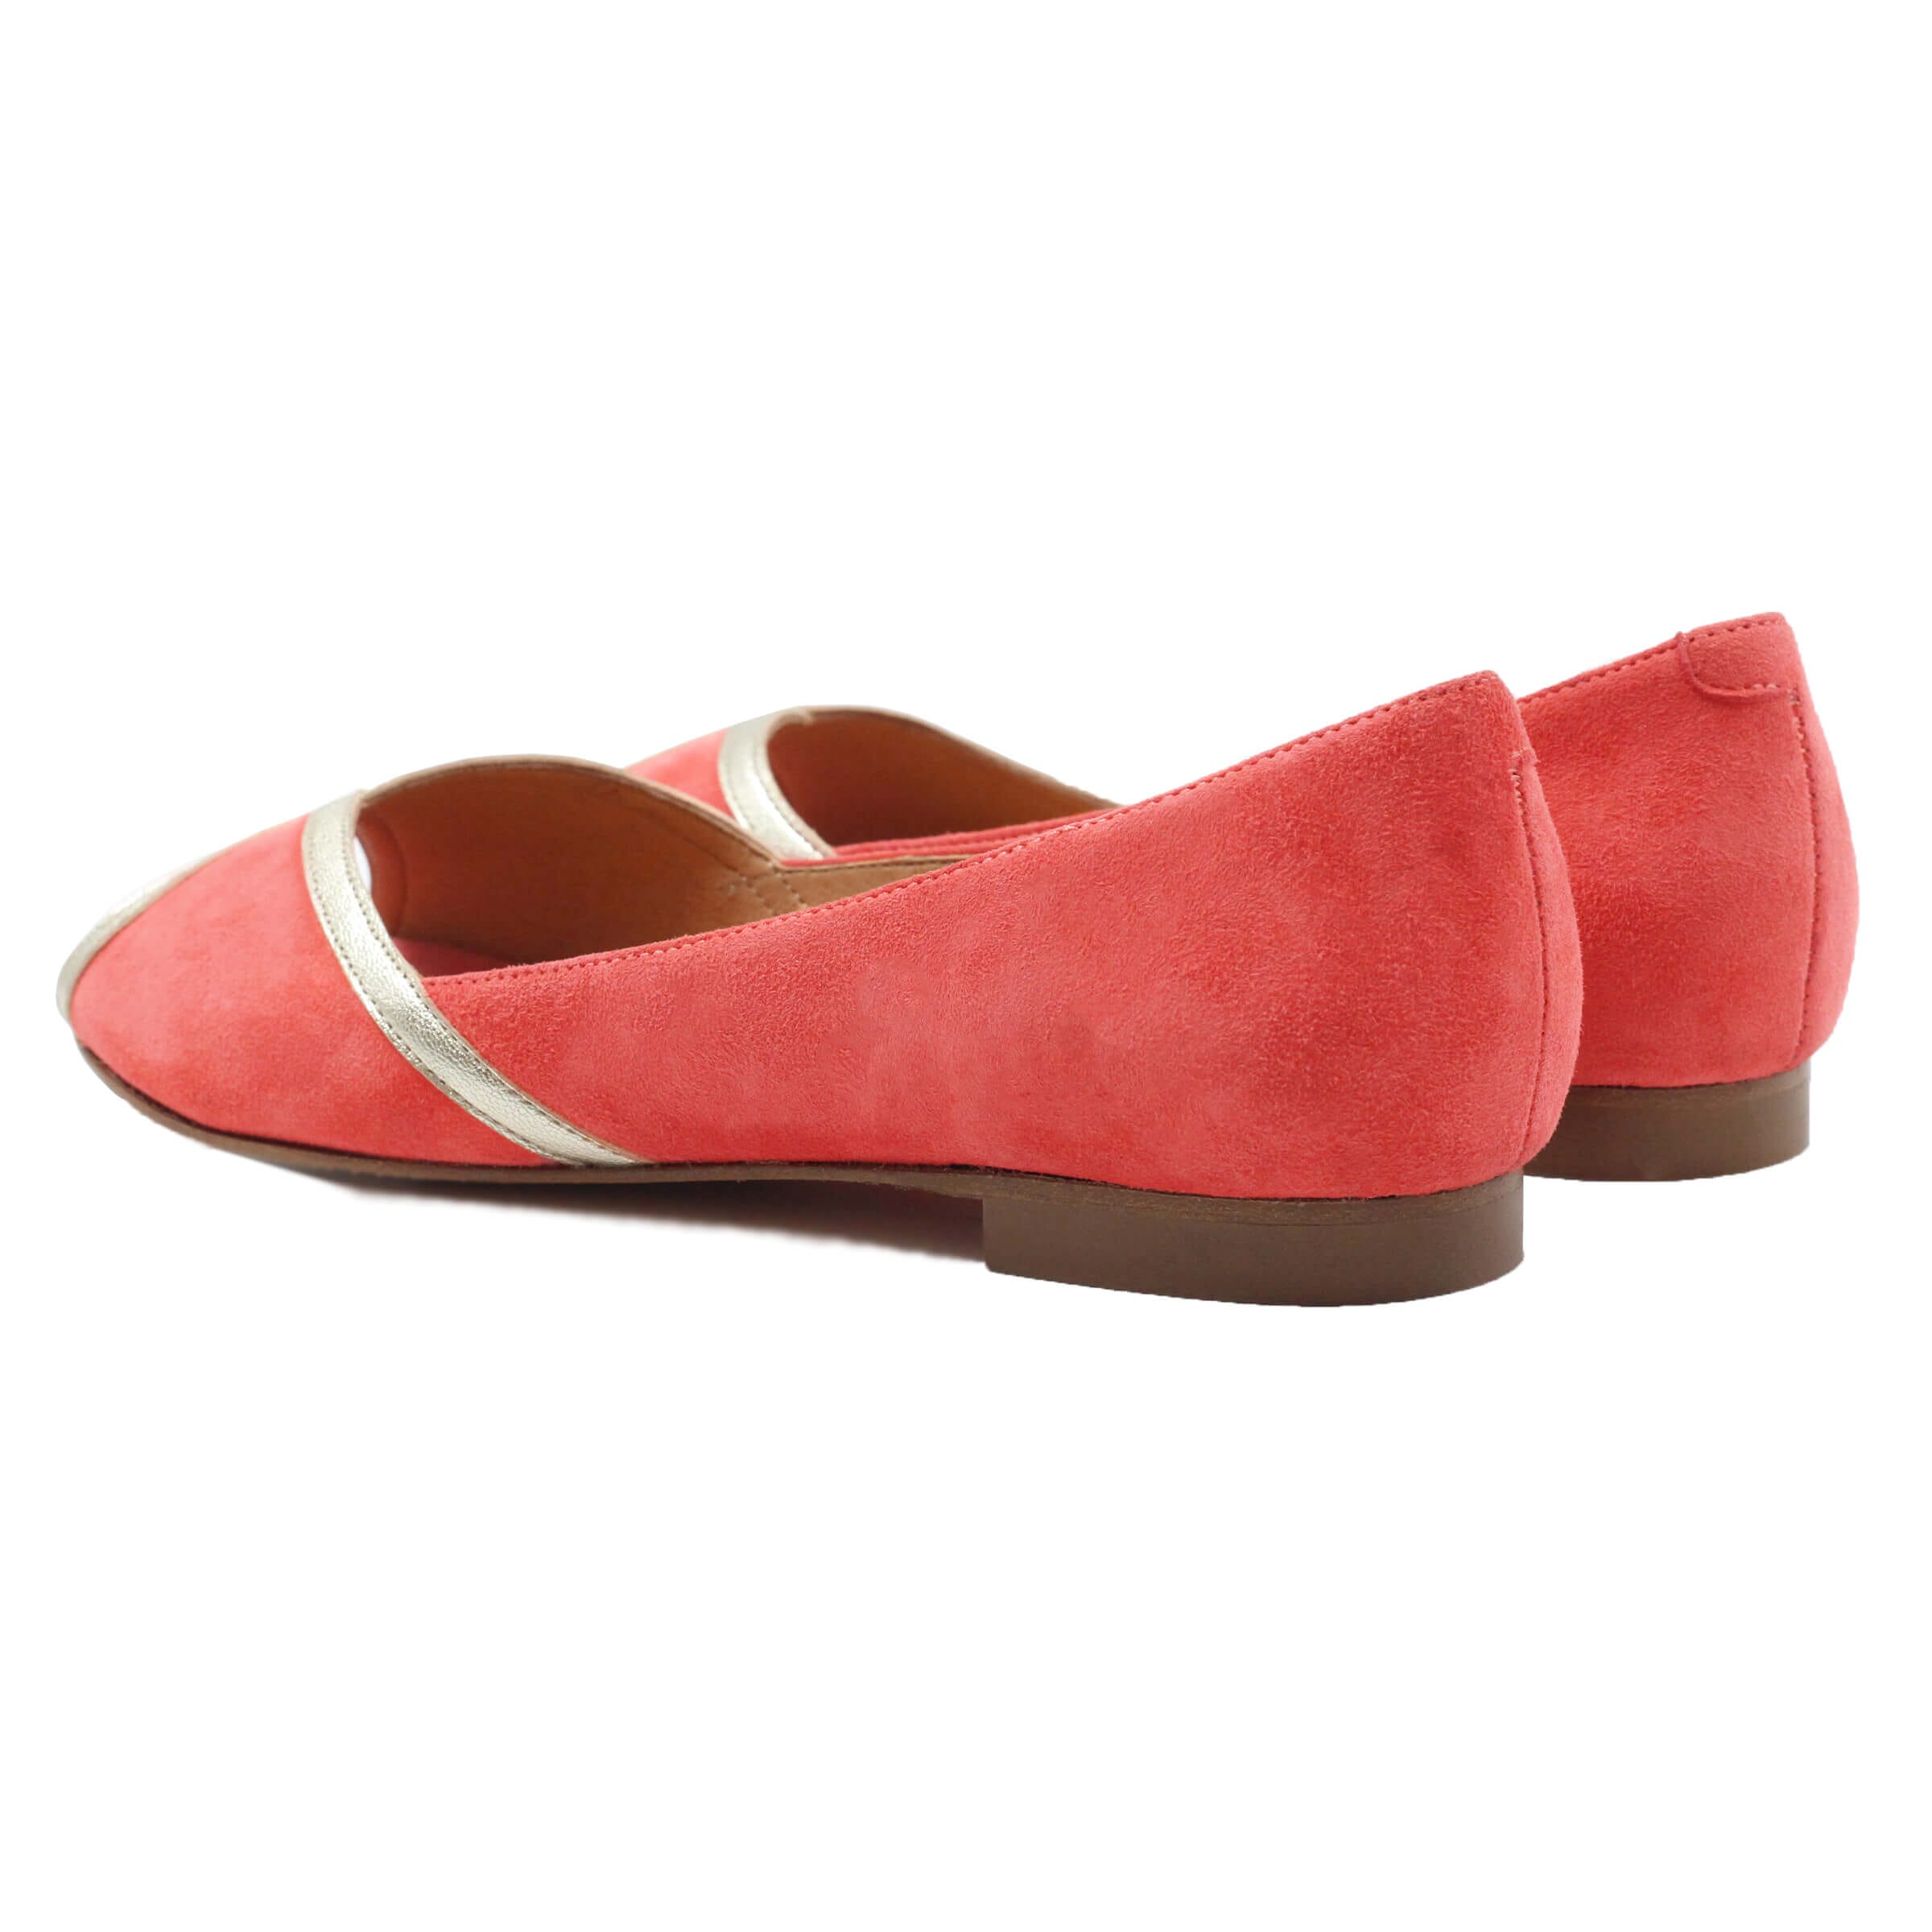 Ballerines classiques rose chair style d\u00e9contract\u00e9 Chaussures Ballerines 